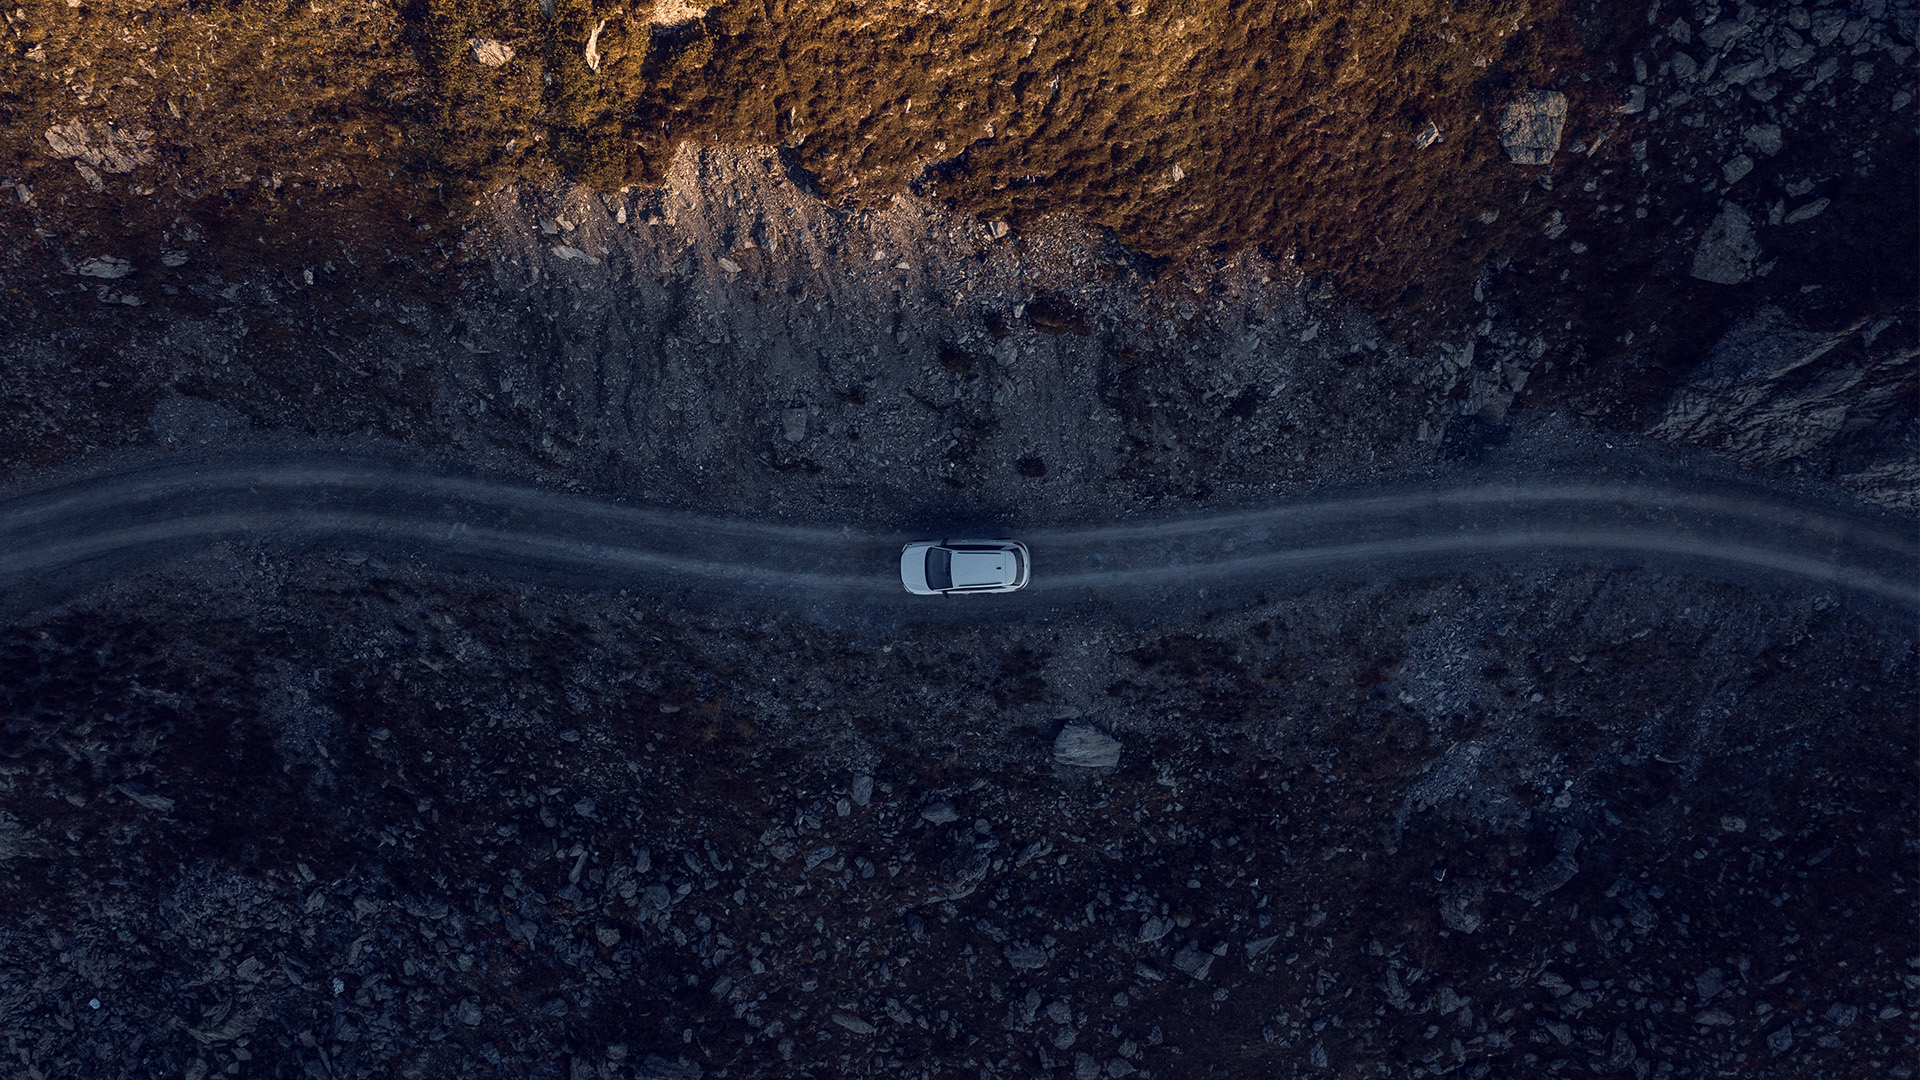 A drone image from above shows a white car on a road in the mountains.